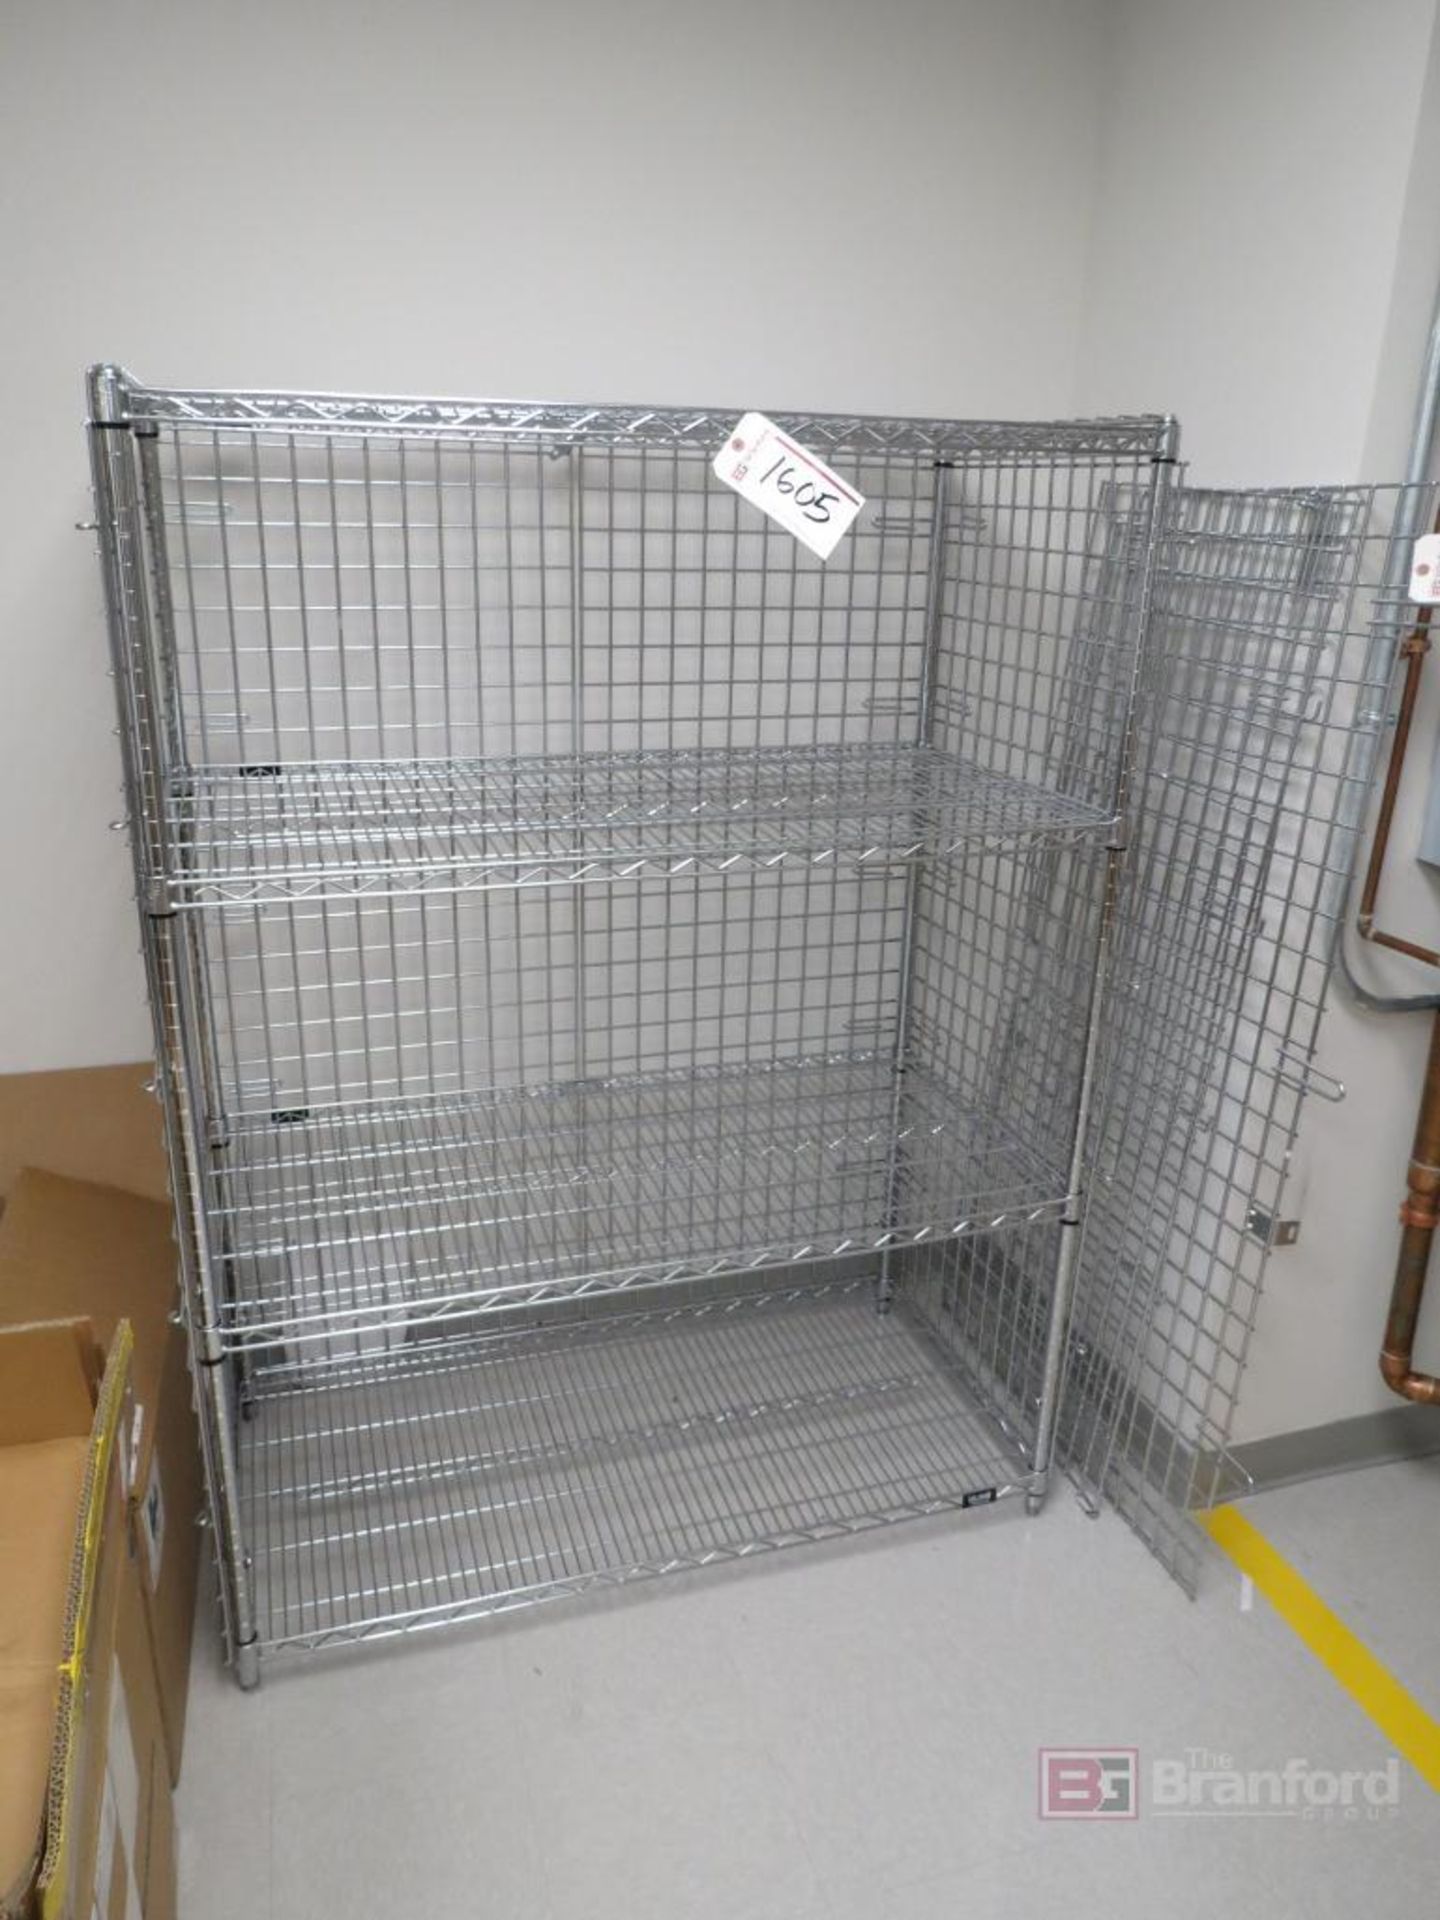 Chrome Wire Rack with Cage Doors